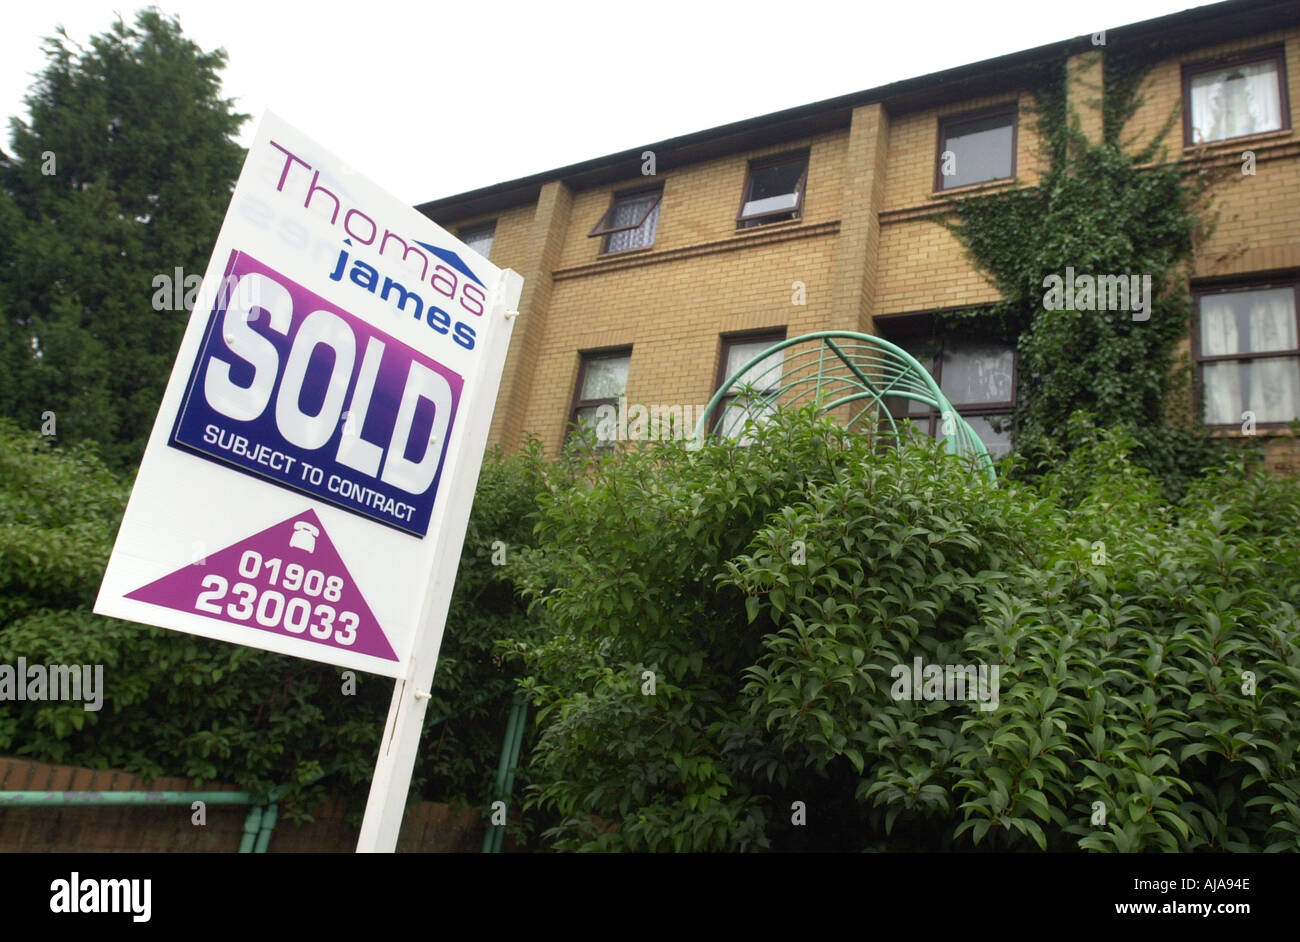 Estate agents sign Stock Photo